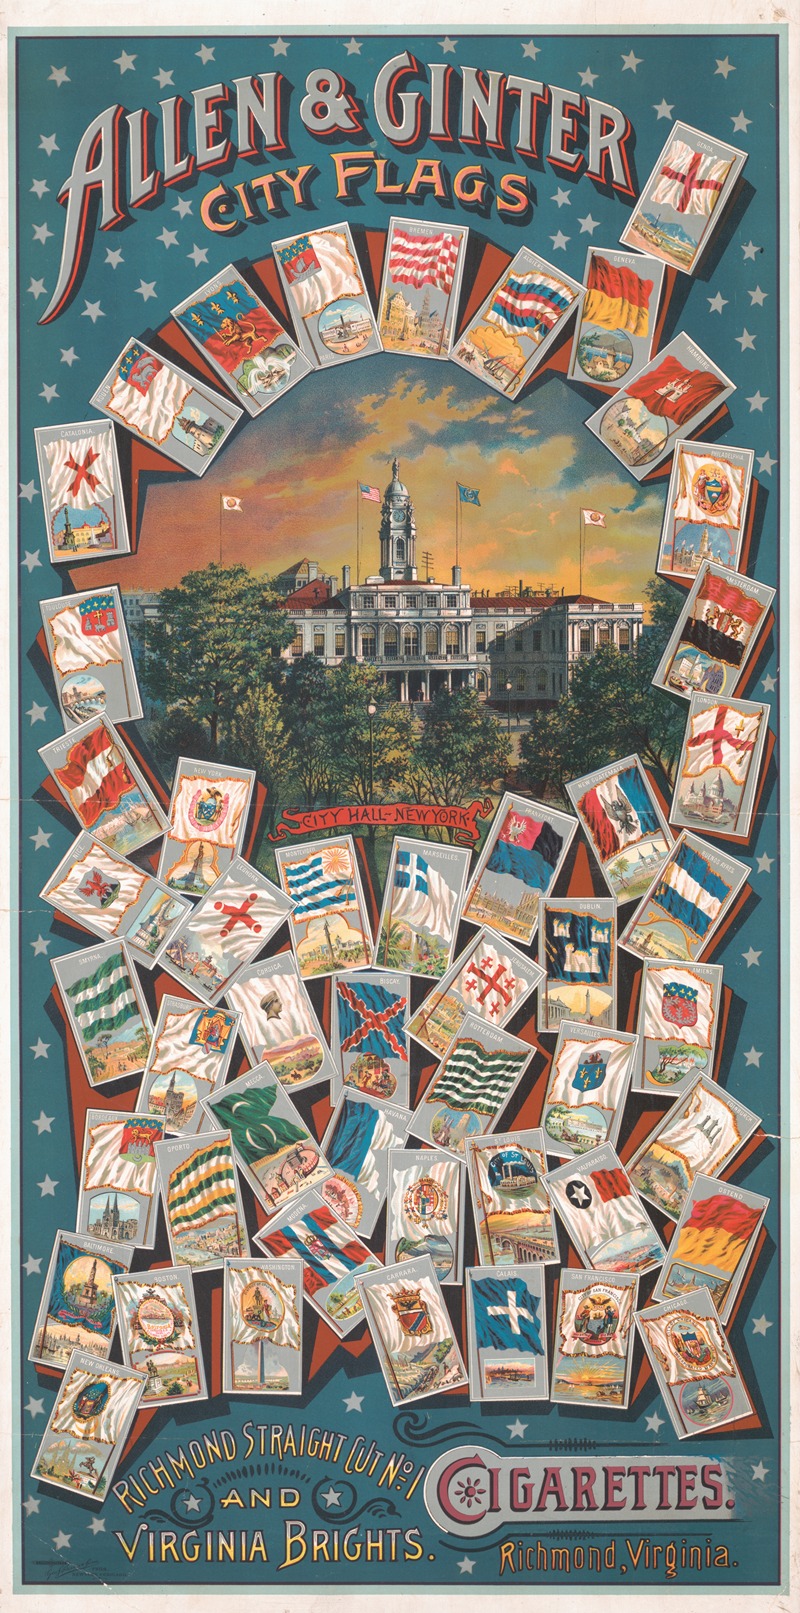 Geo. S. Harris and Sons - Allen and Ginter, city flags